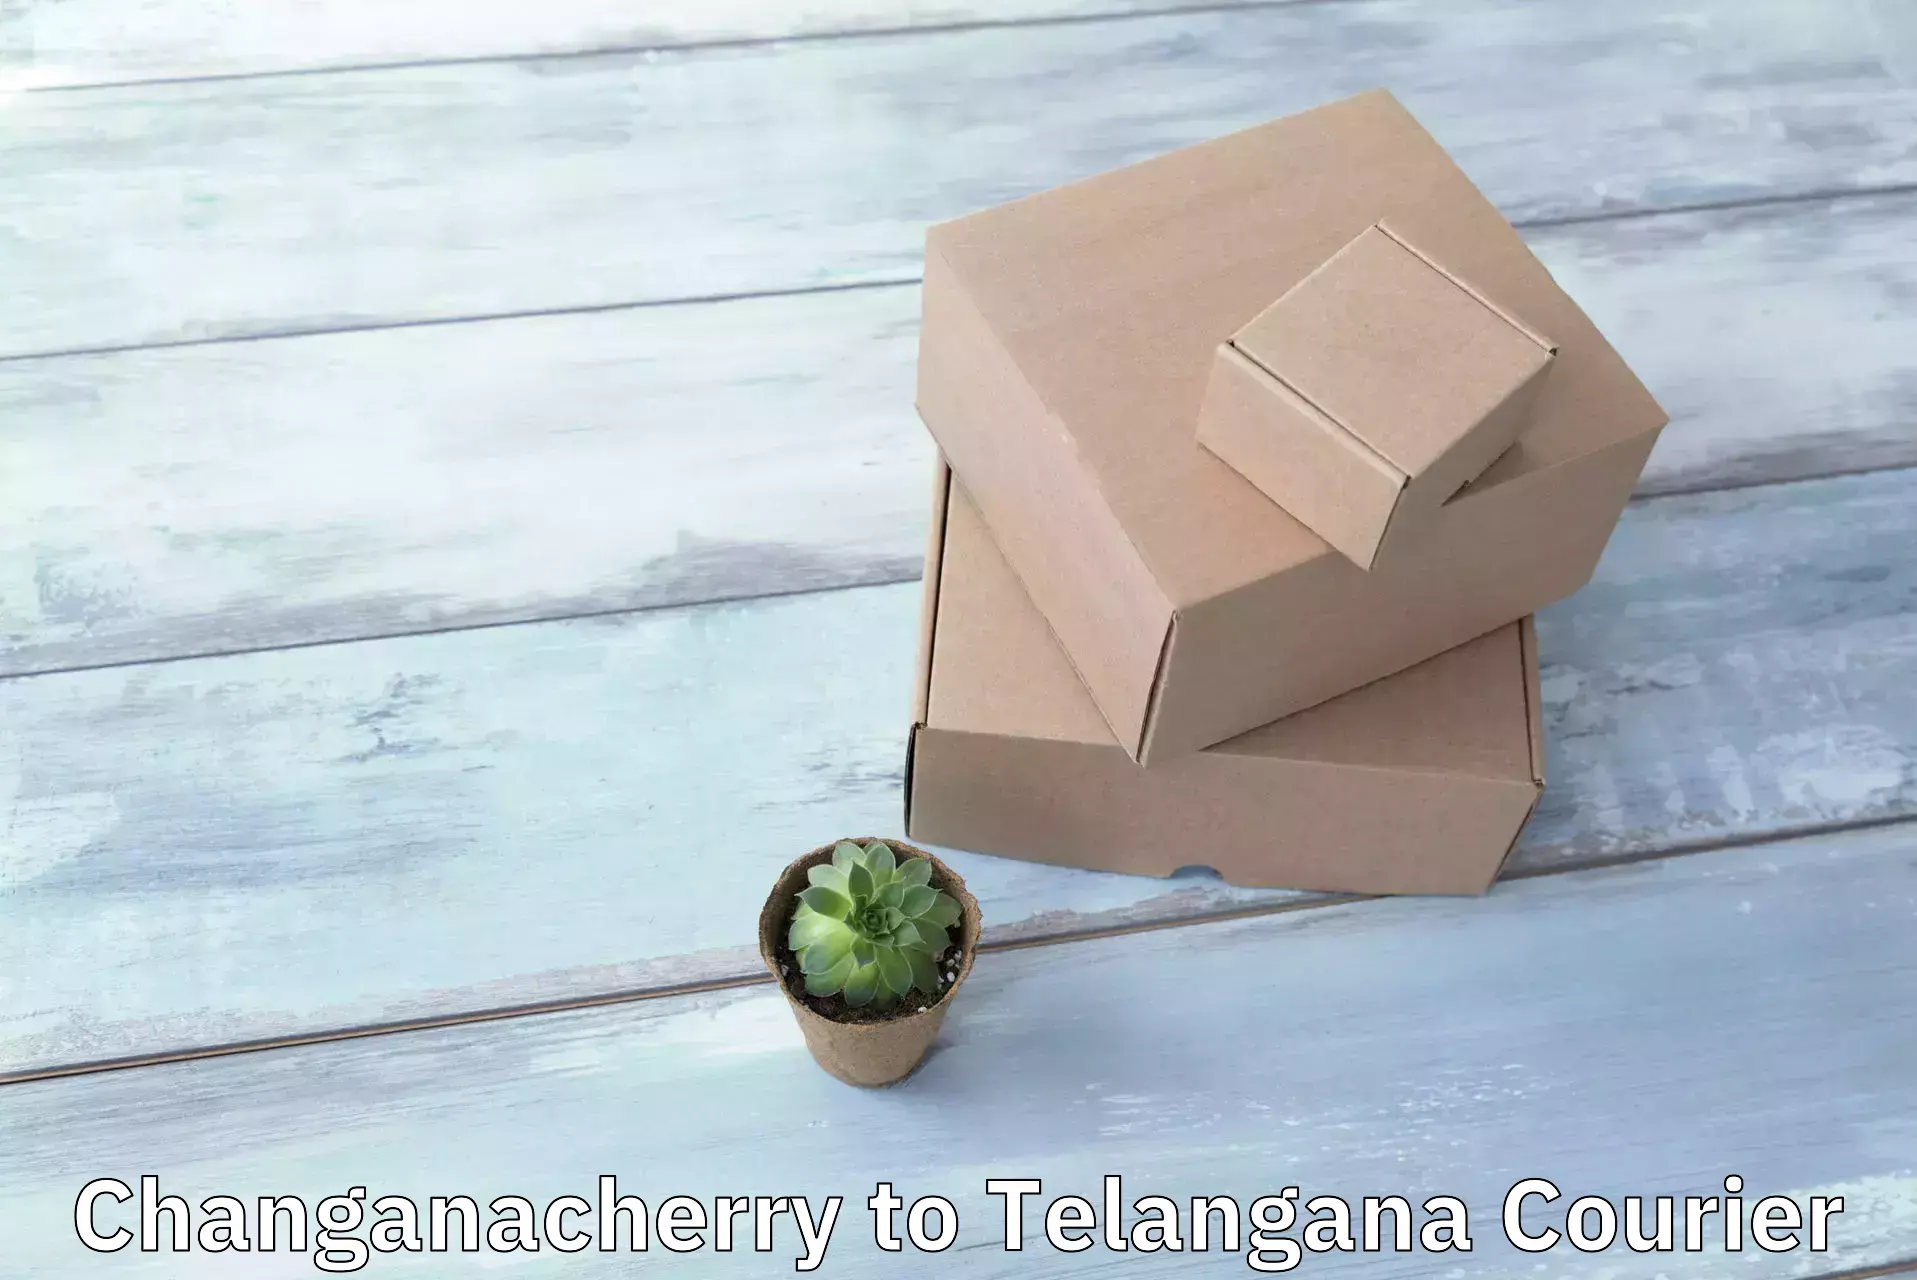 Affordable parcel service Changanacherry to Sangareddy